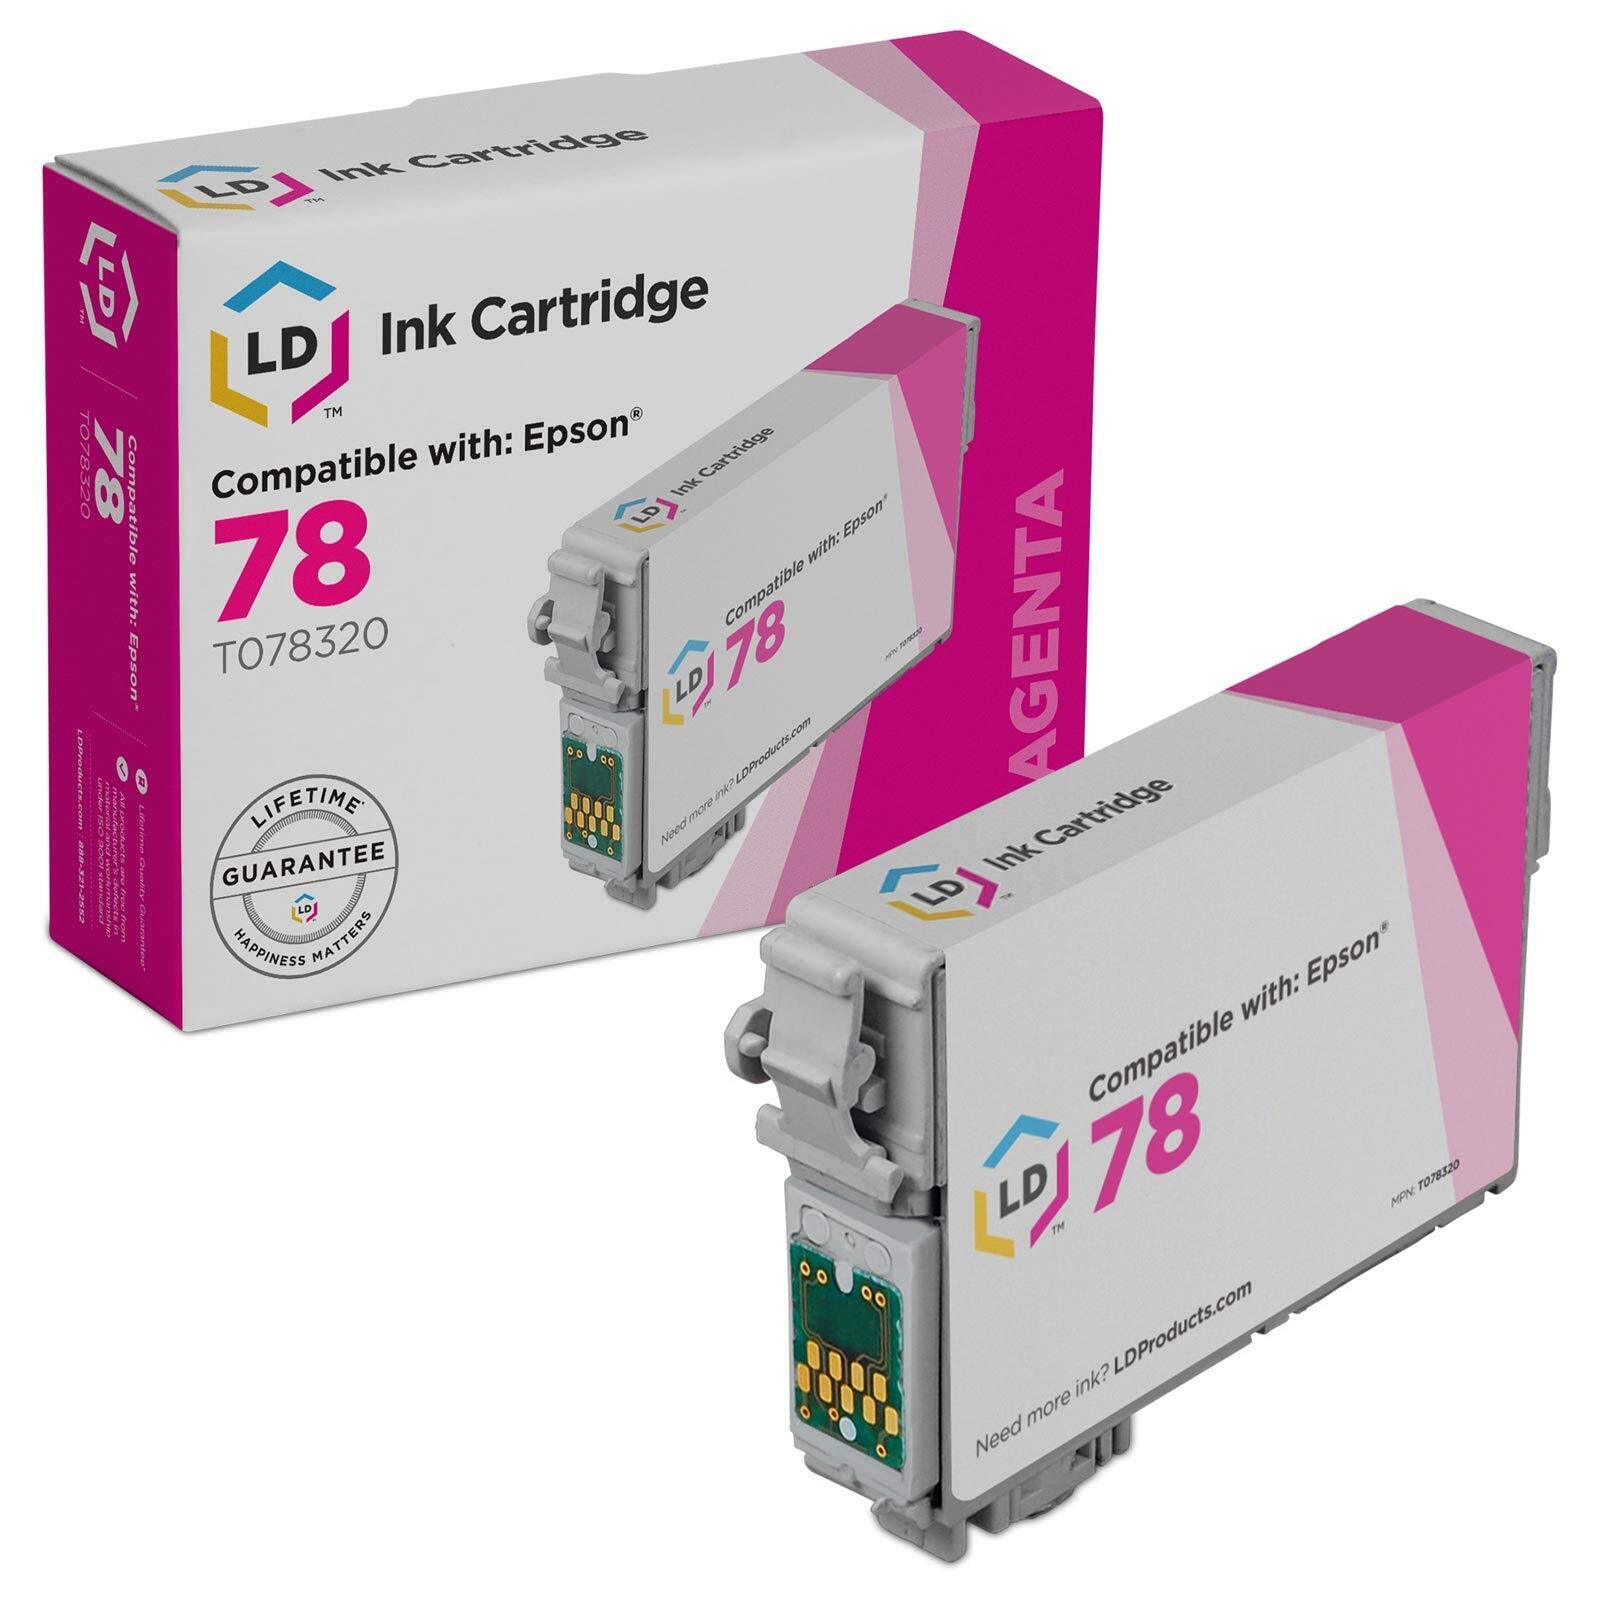 LD T078320 78 Magenta Ink Cartridge for Epson R260 R280 R380 RX580 RX595 RX680